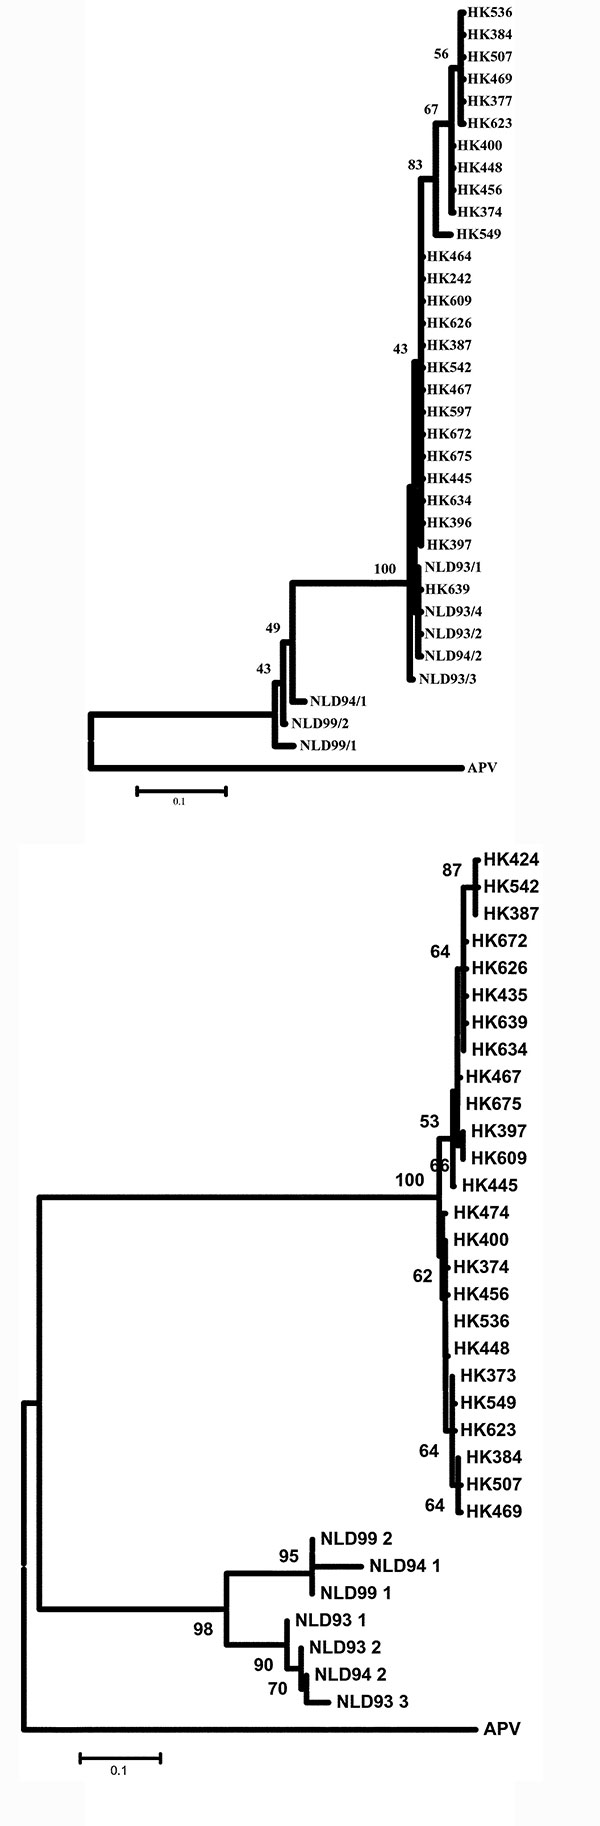 Phylogenetic tree of the human metapneumovirus a) L gene and b) F gene. Viruses detected in Hong Kong are prefixed HK, and the sequences have been deposited in GenBank under accession numbers AY294849 through to AY294870. Other viral sequences were obtained from GenBank. Abbreviations used: APV, avian pneumovirus; NL, the Netherlands.